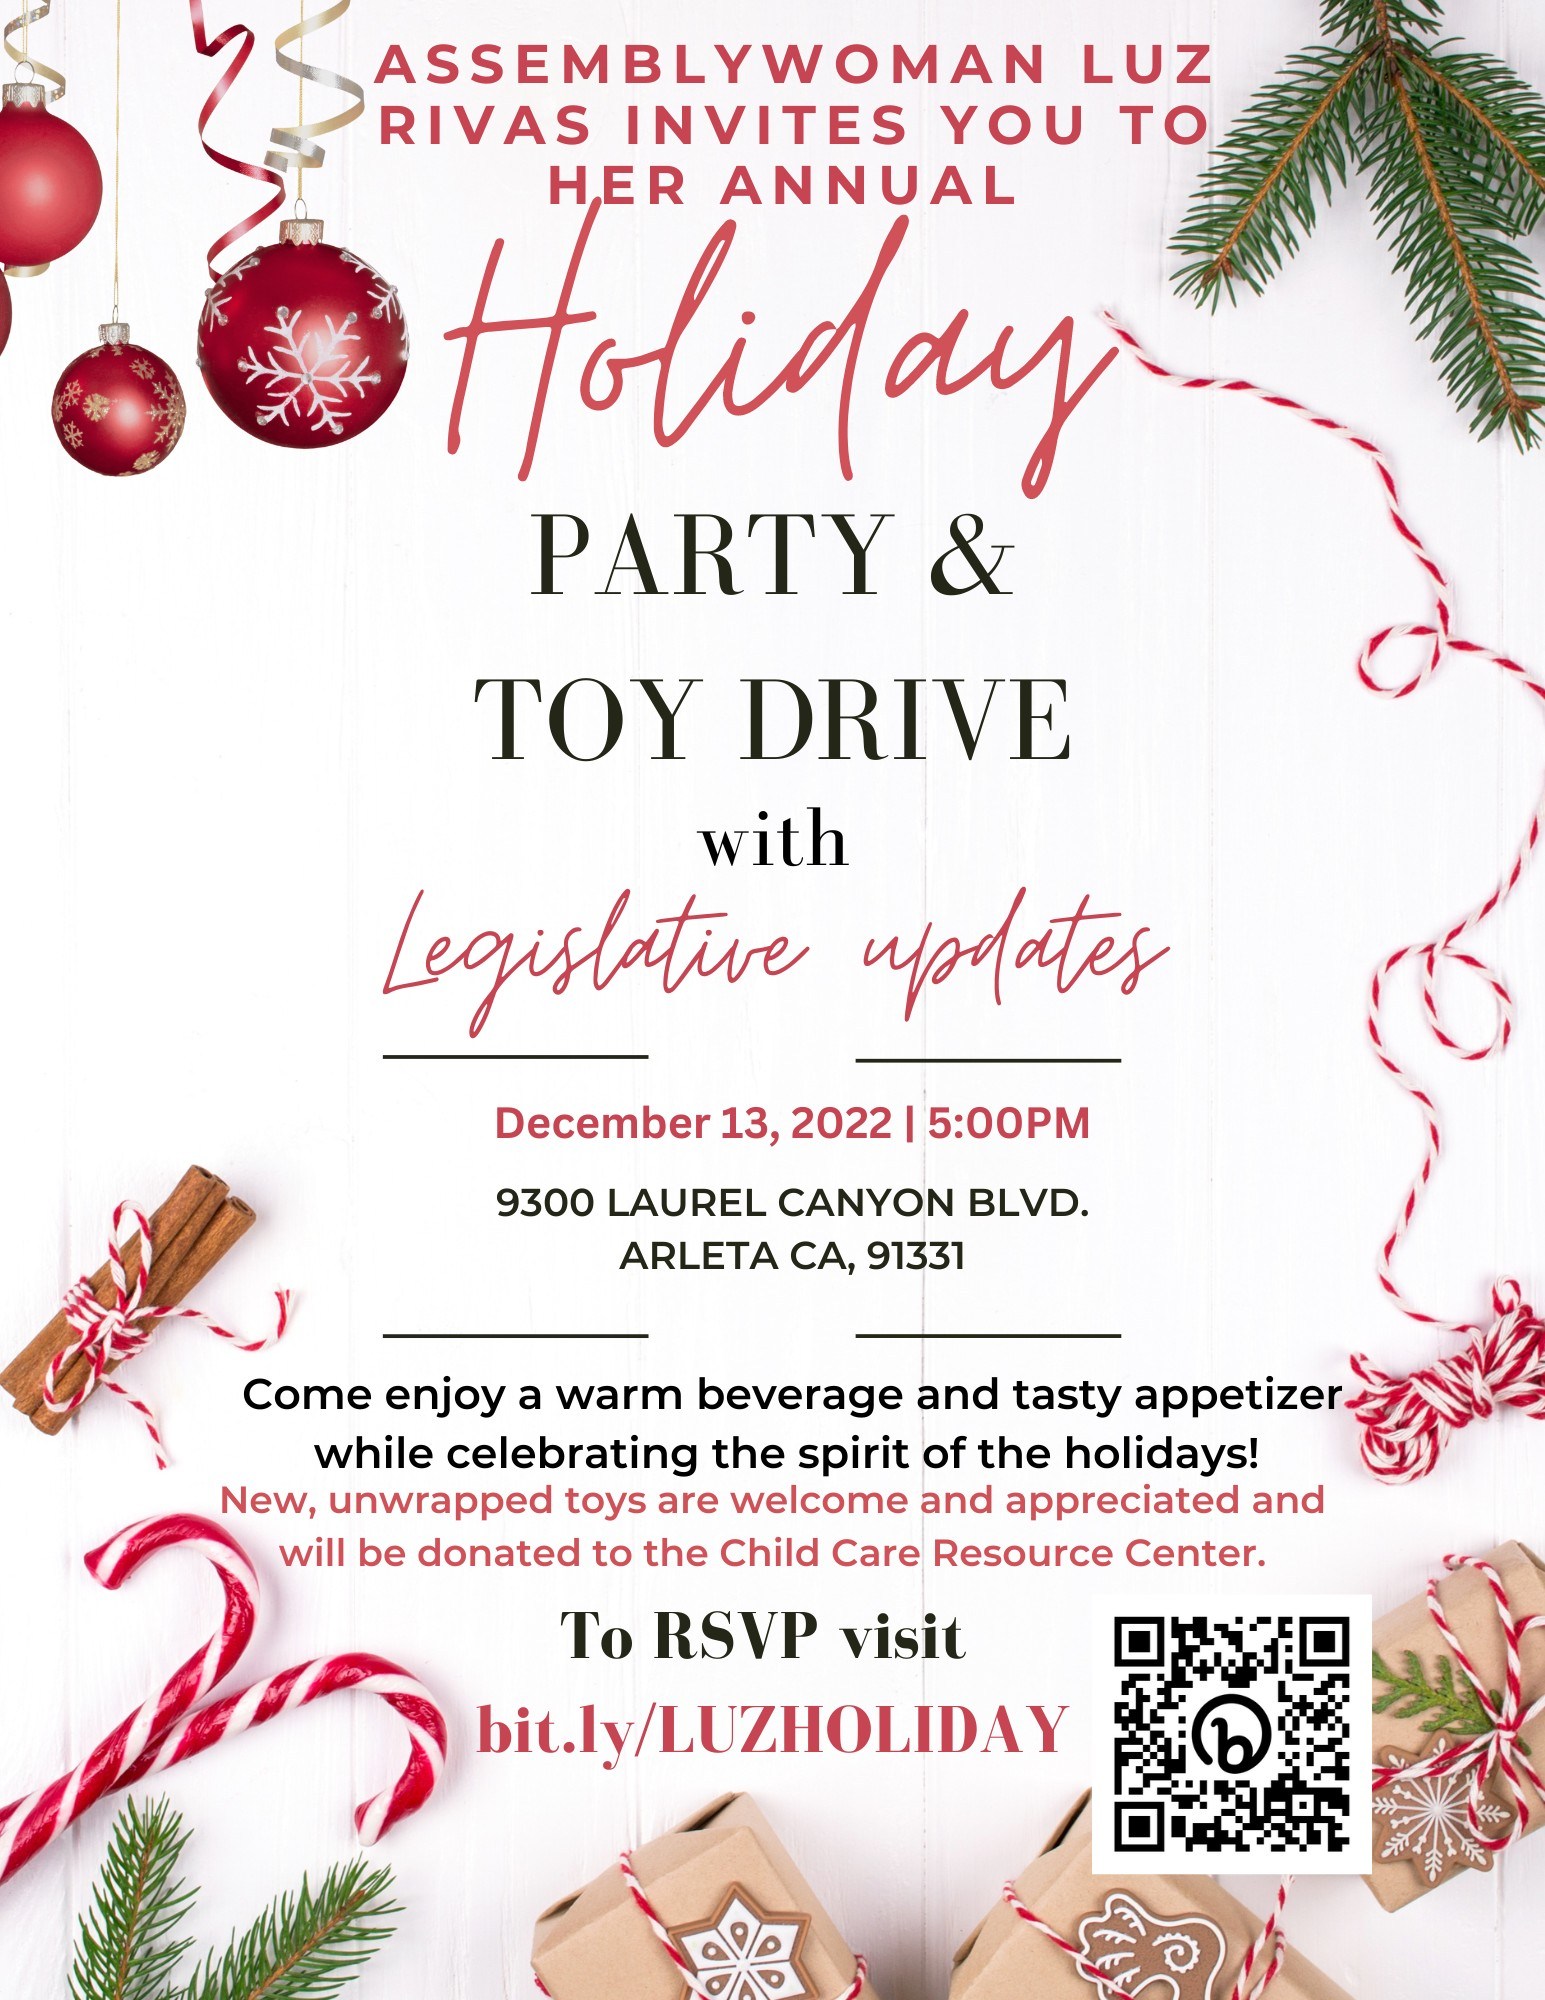 Please Join My Team and I for Our Annual Holiday Party & Toy Drive on Tuesday, December 13th